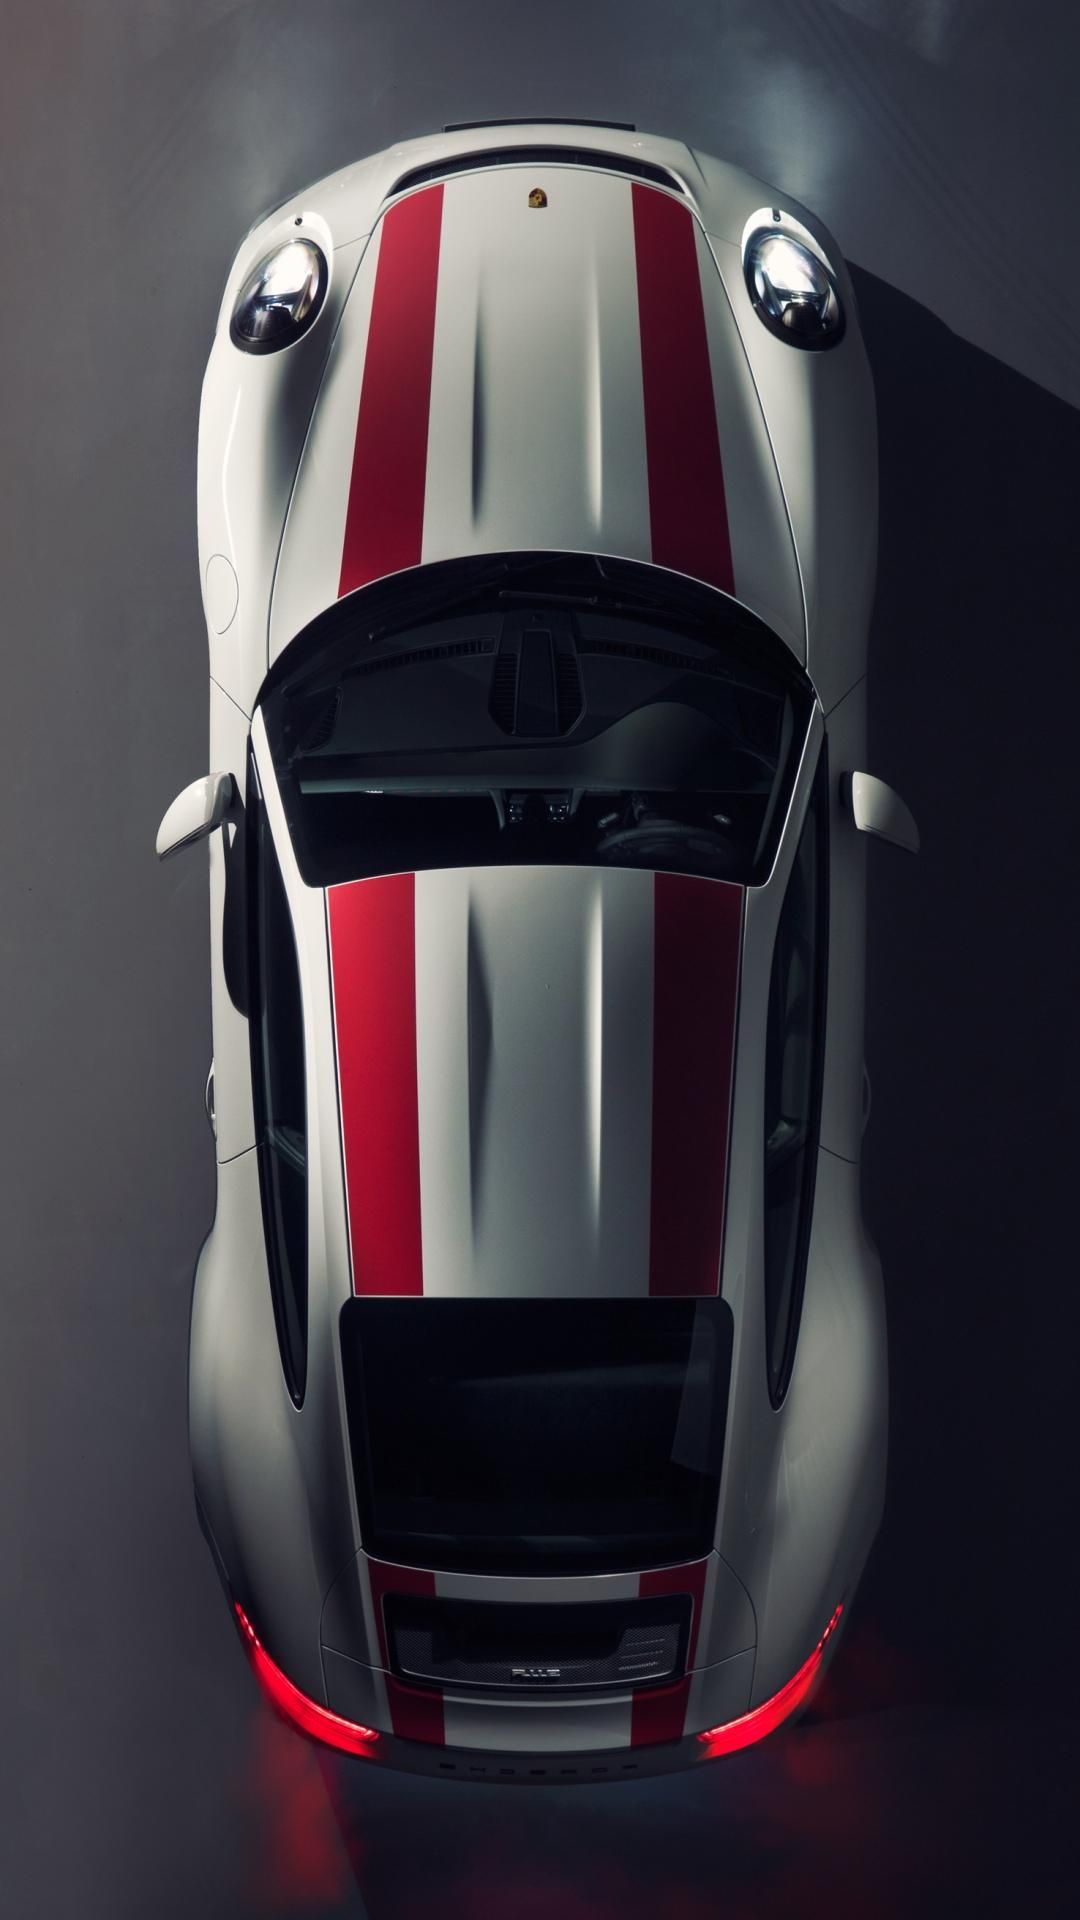 4K Car Wallpaper APK 22 Download for Android